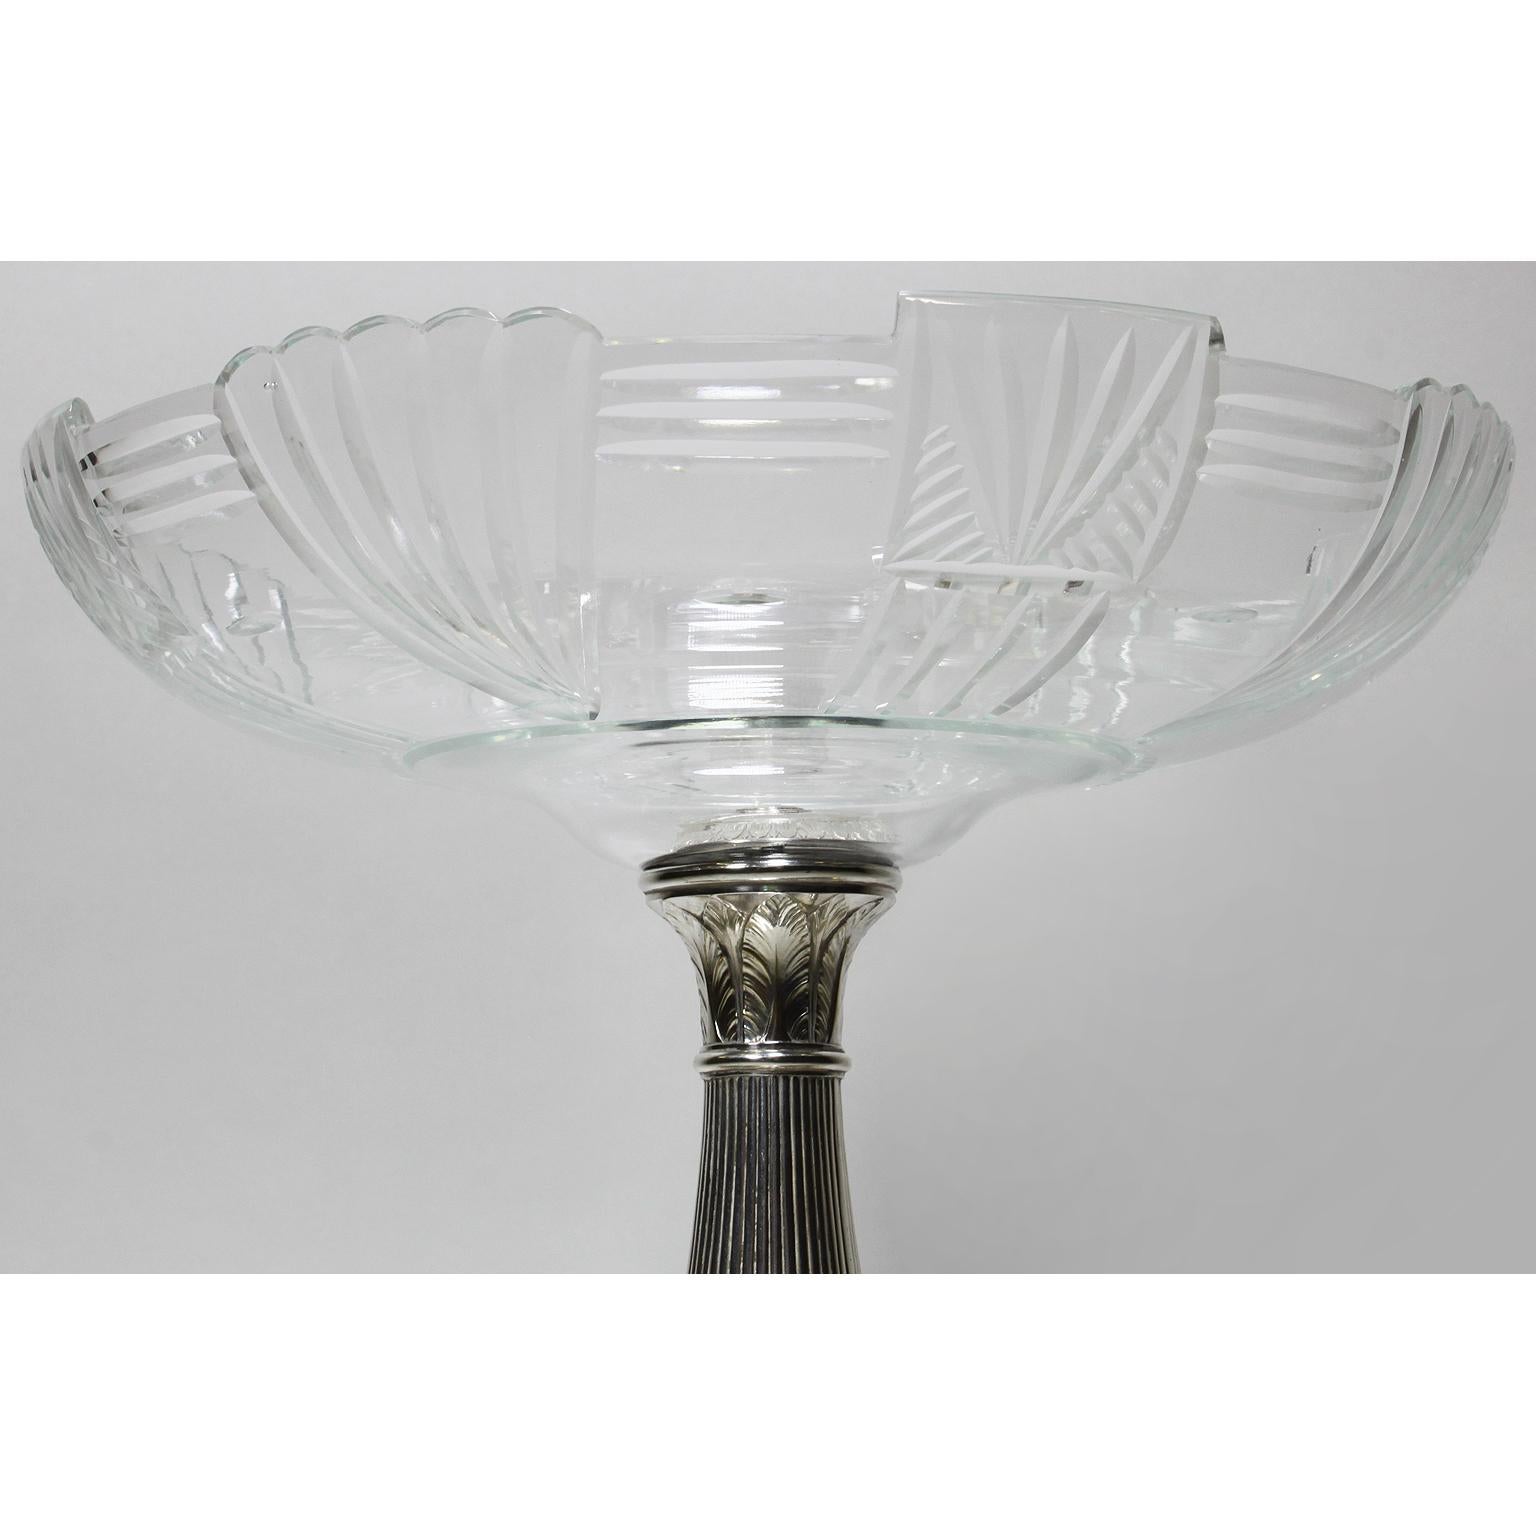 Manner of Christofle 19th-20th Century Silver-Plated & Crystal Fruit Centerpiece In Good Condition For Sale In Los Angeles, CA